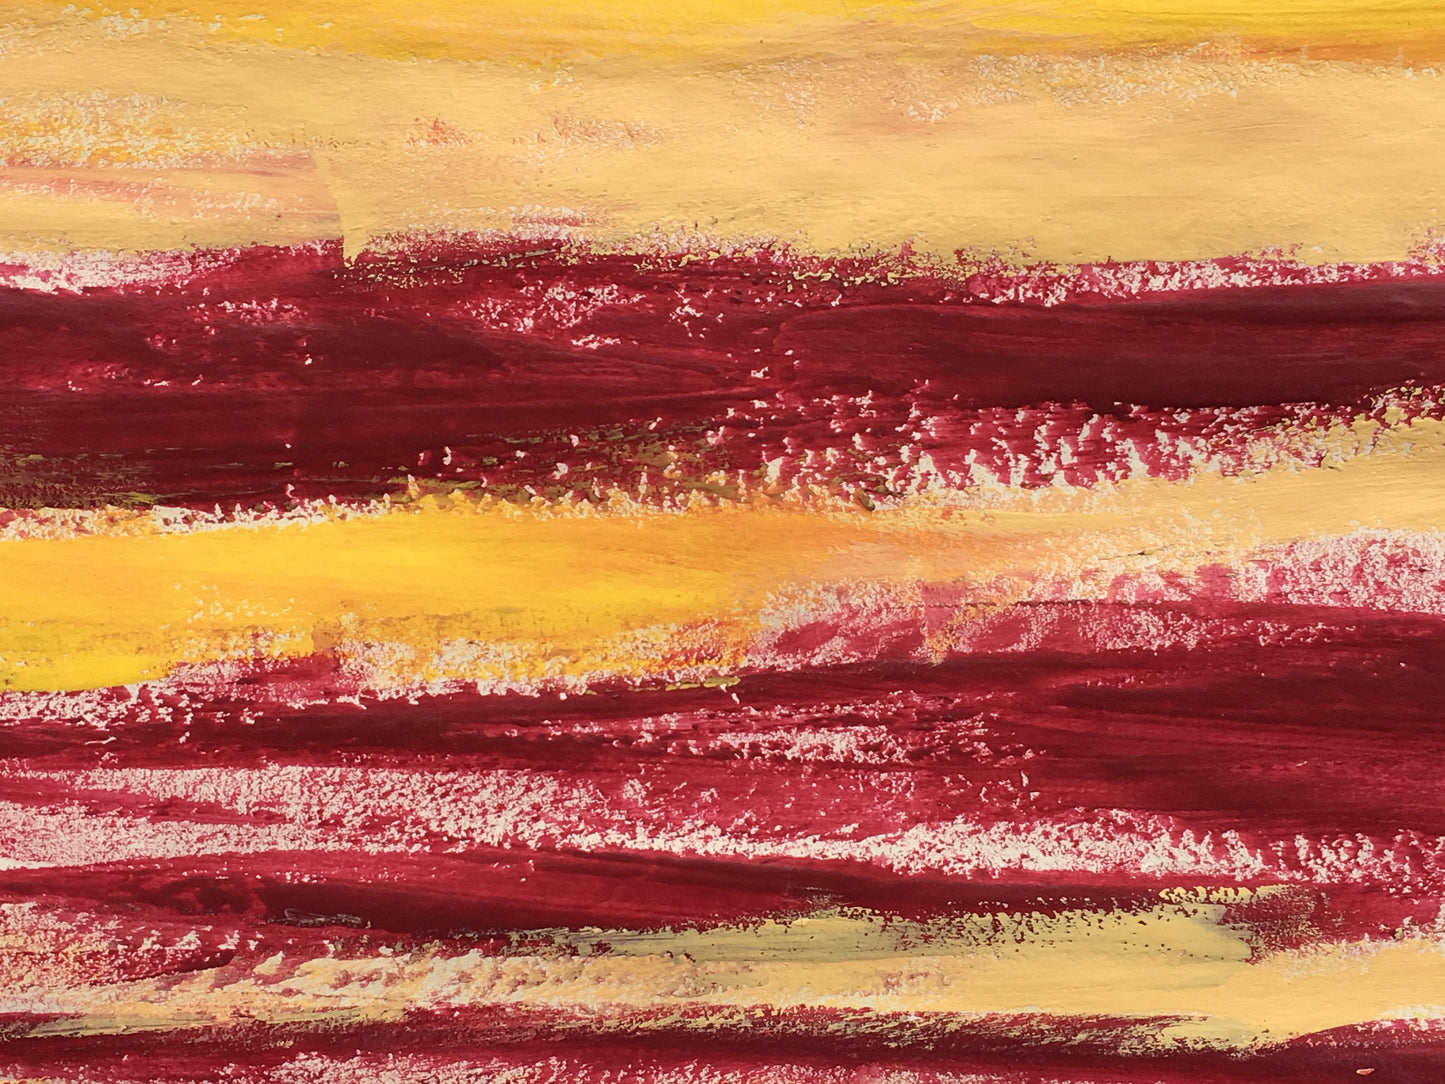 [SOLD] Abstract Red & Yellow Streak Painting on Paper